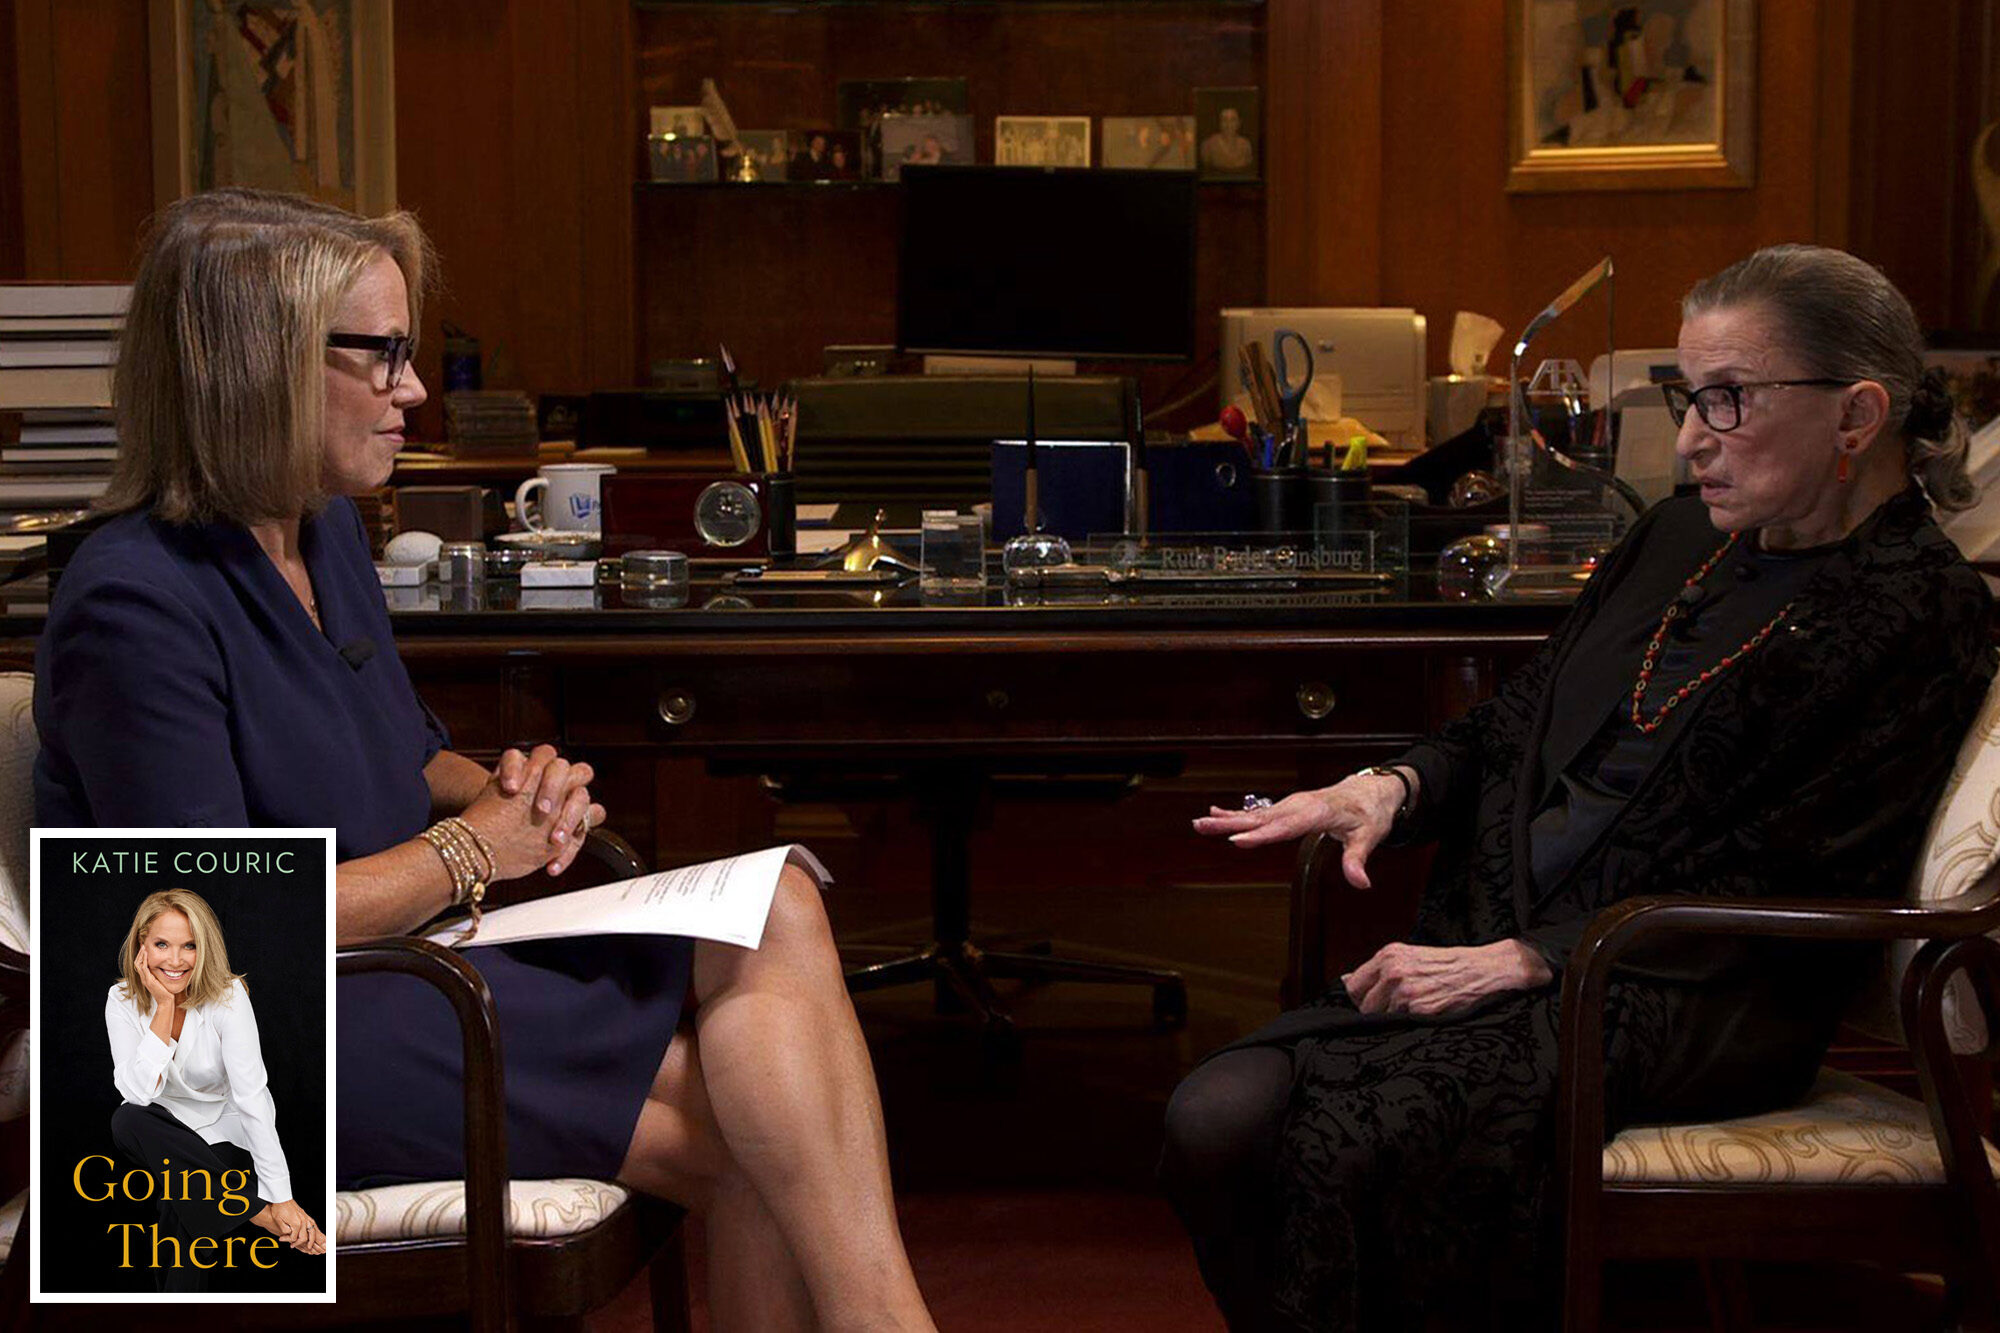 Katie Couric and Ruth Bader Ginsburg